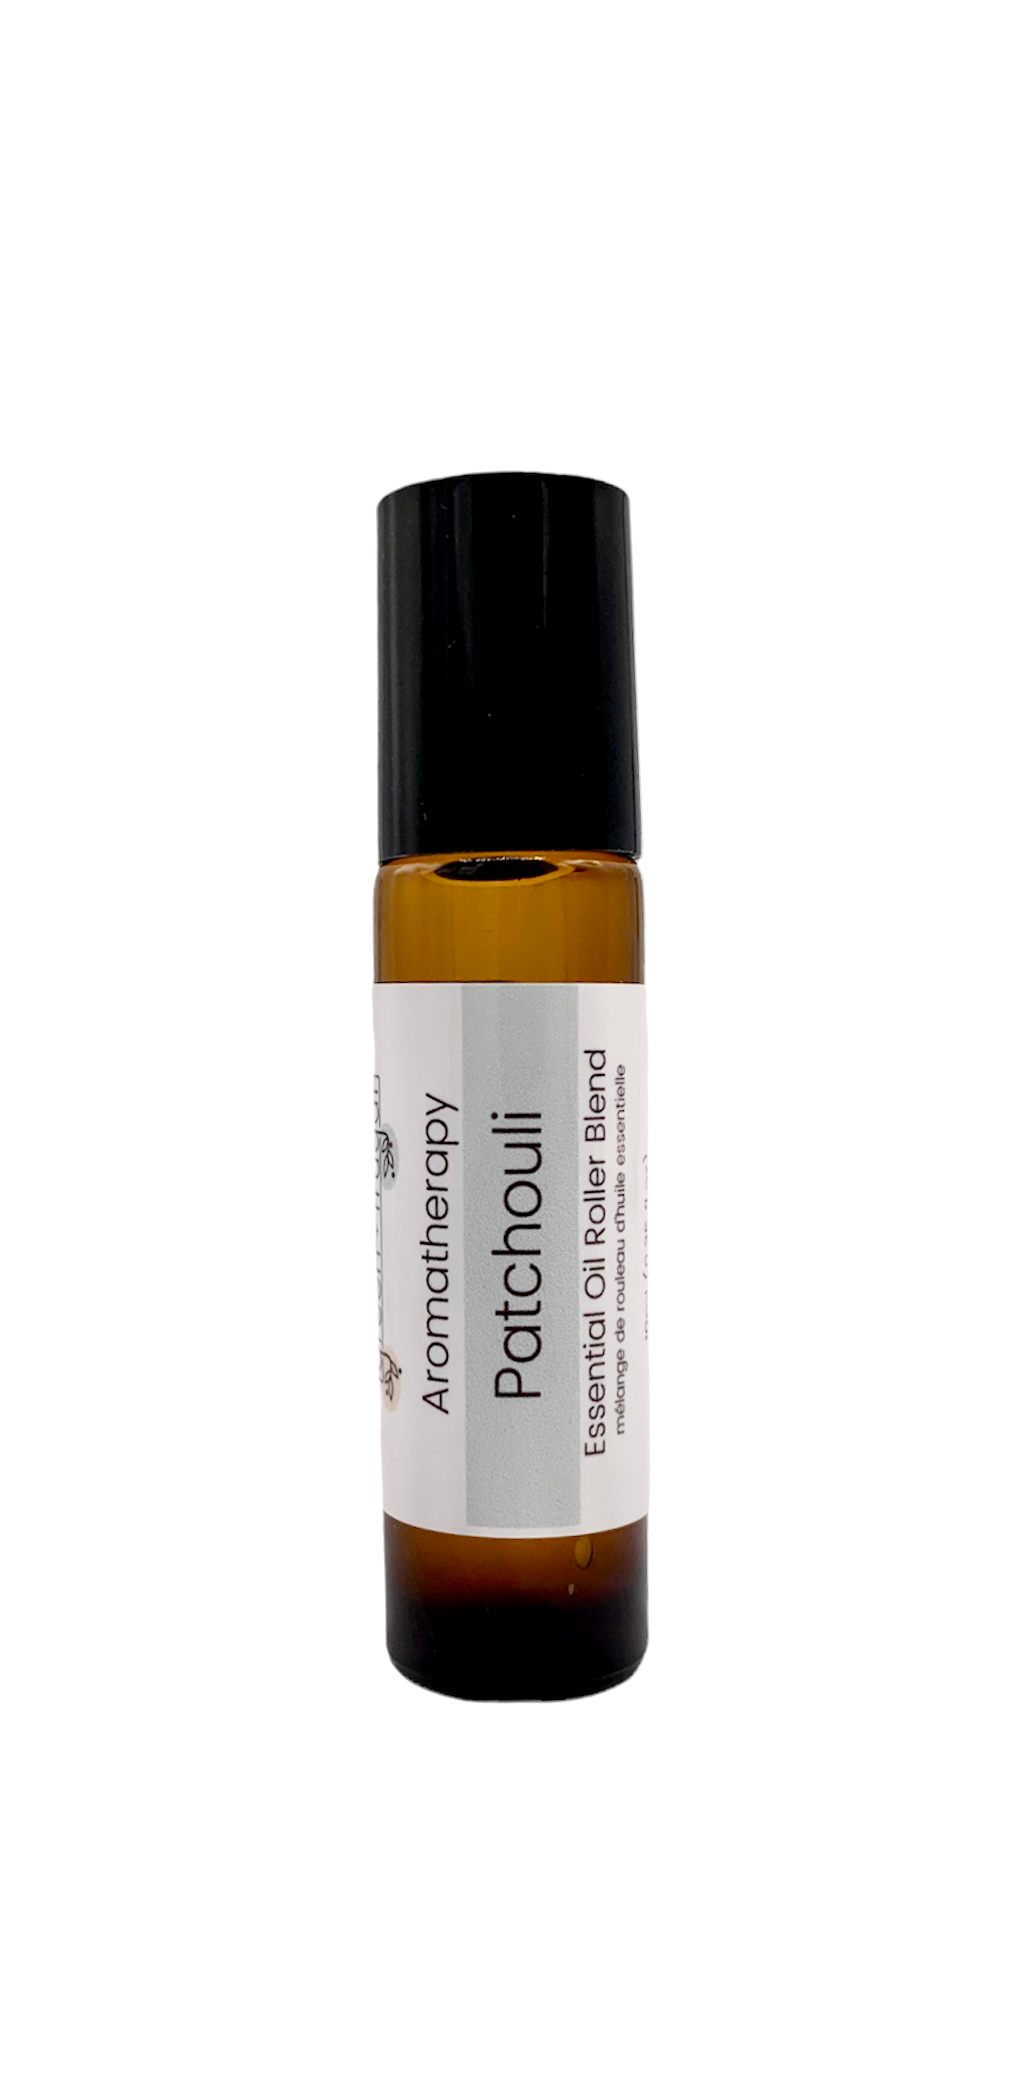 Patchouli 10ml Roll-on Blend